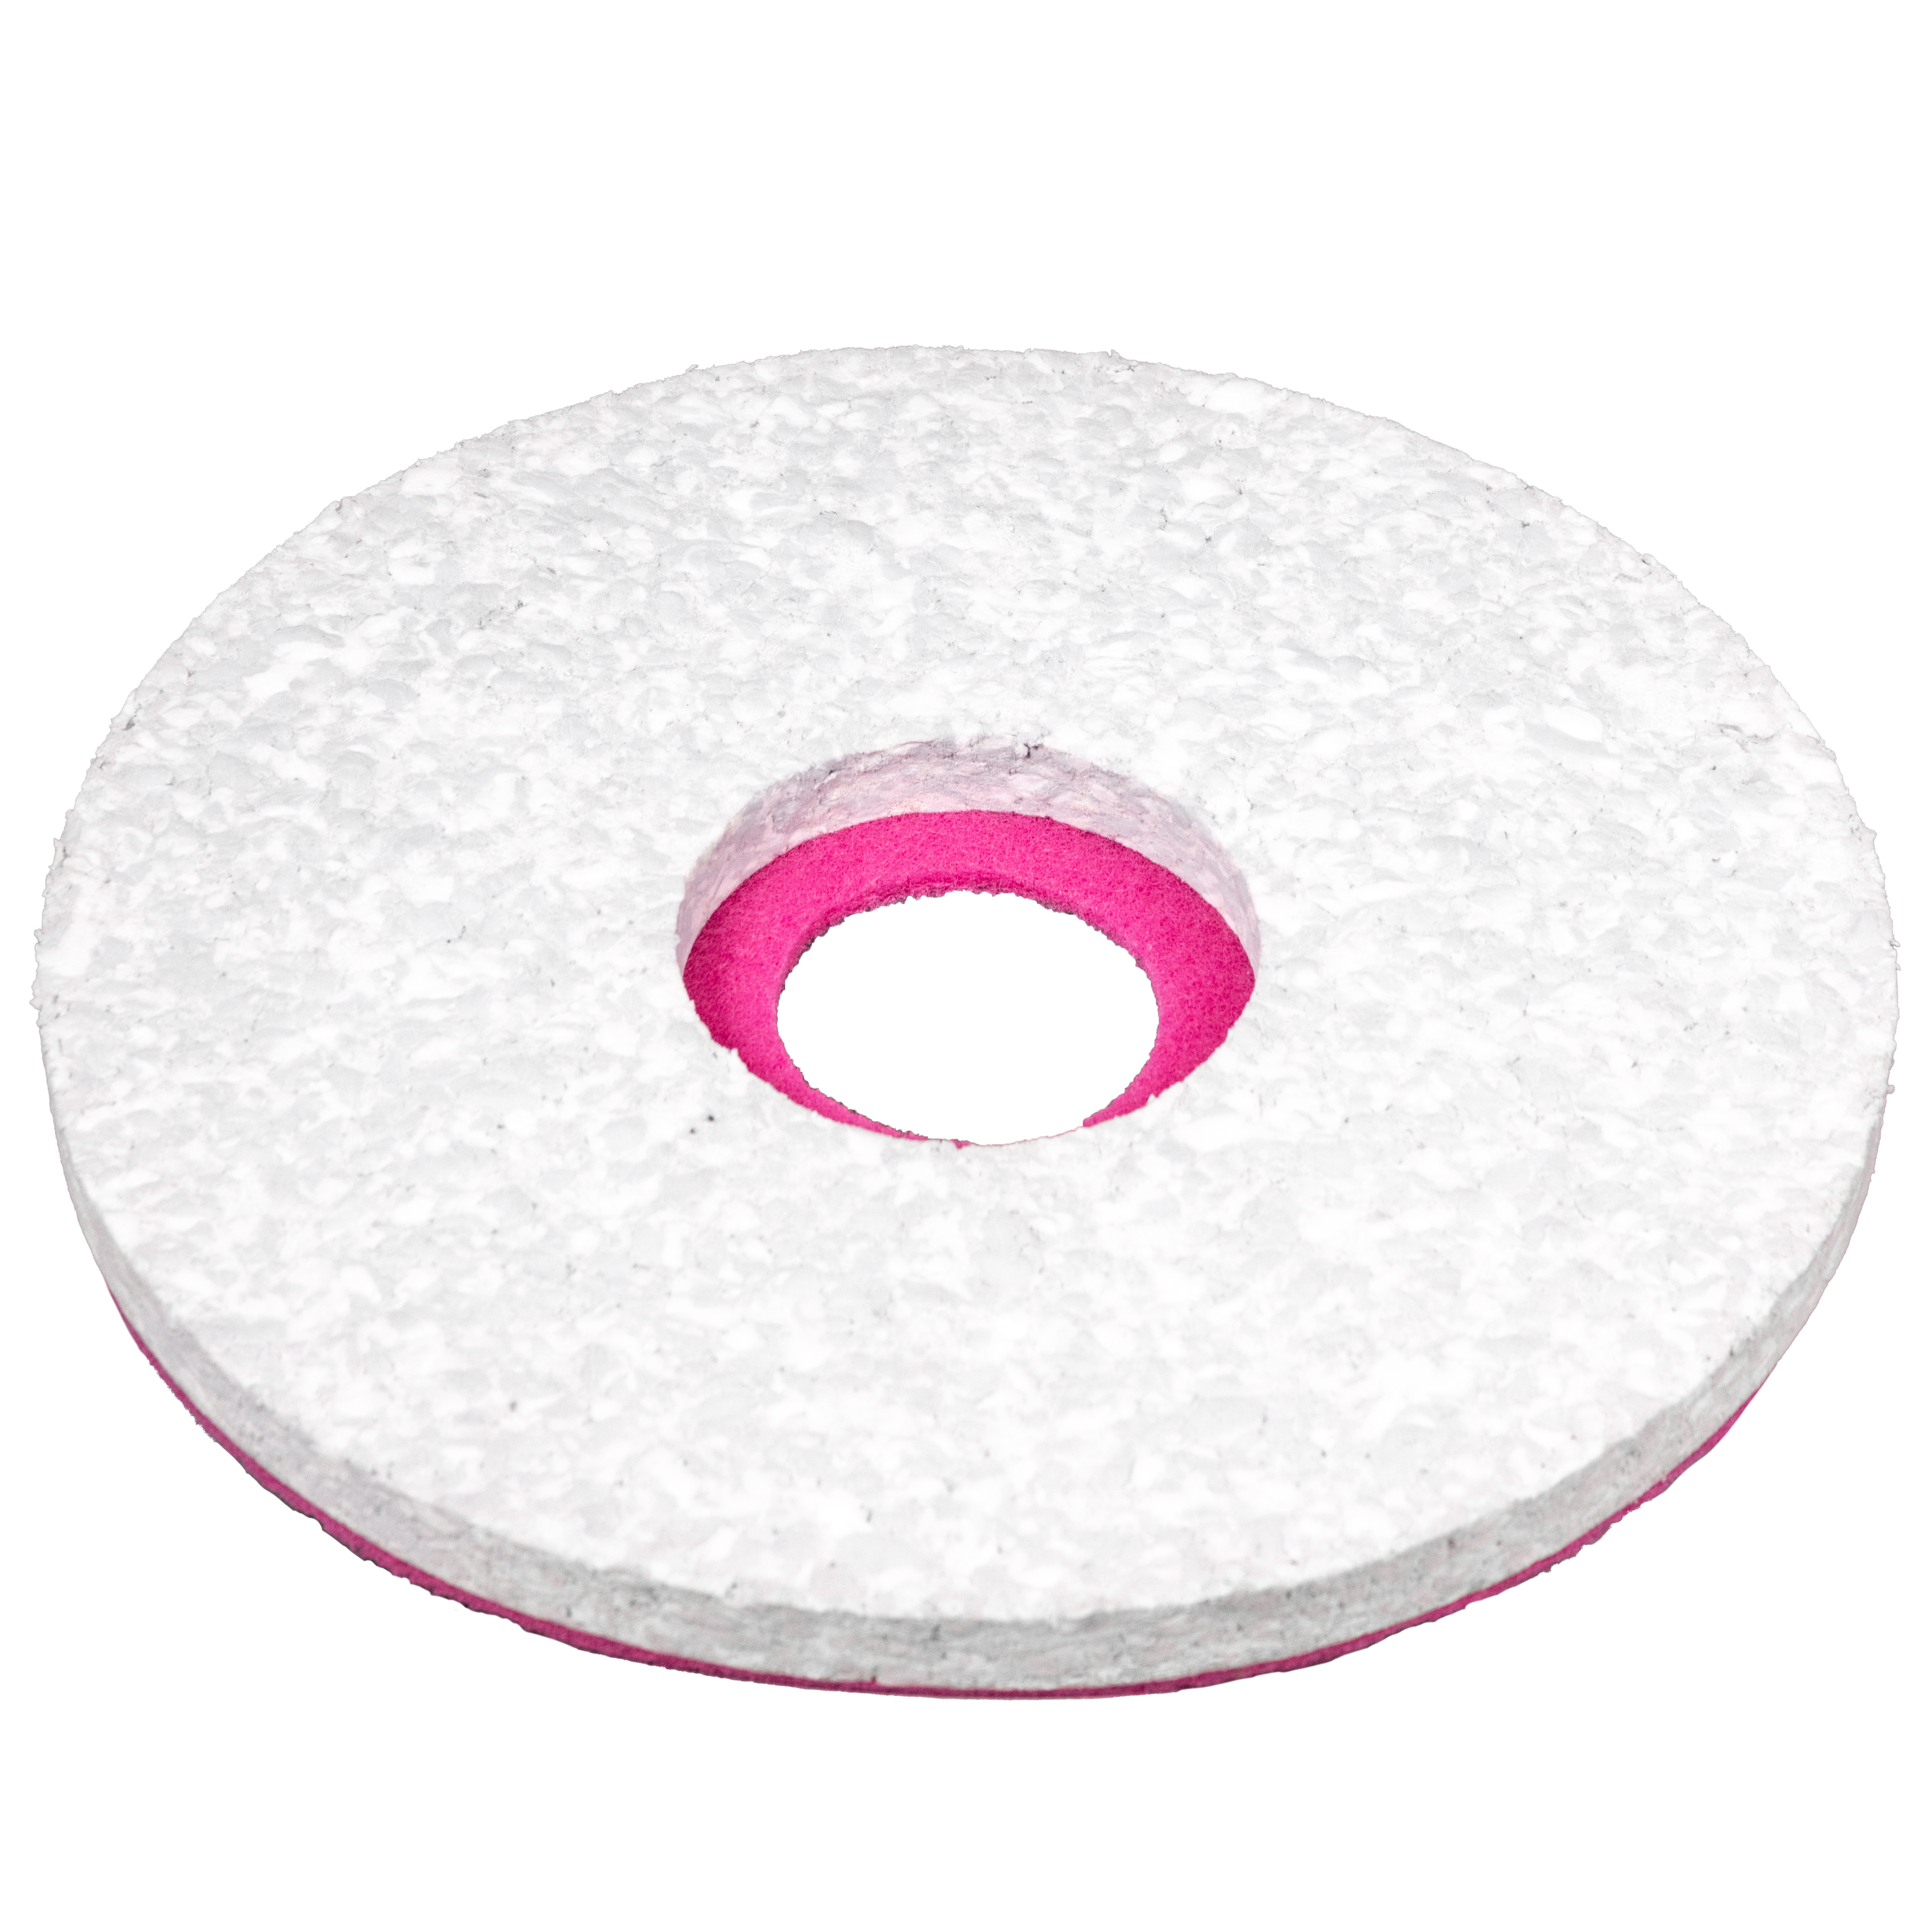 PinkPowerSaver Pad 21inch/530mm for scrubber dryer - melamine pad for intensive and maintenance cleaning